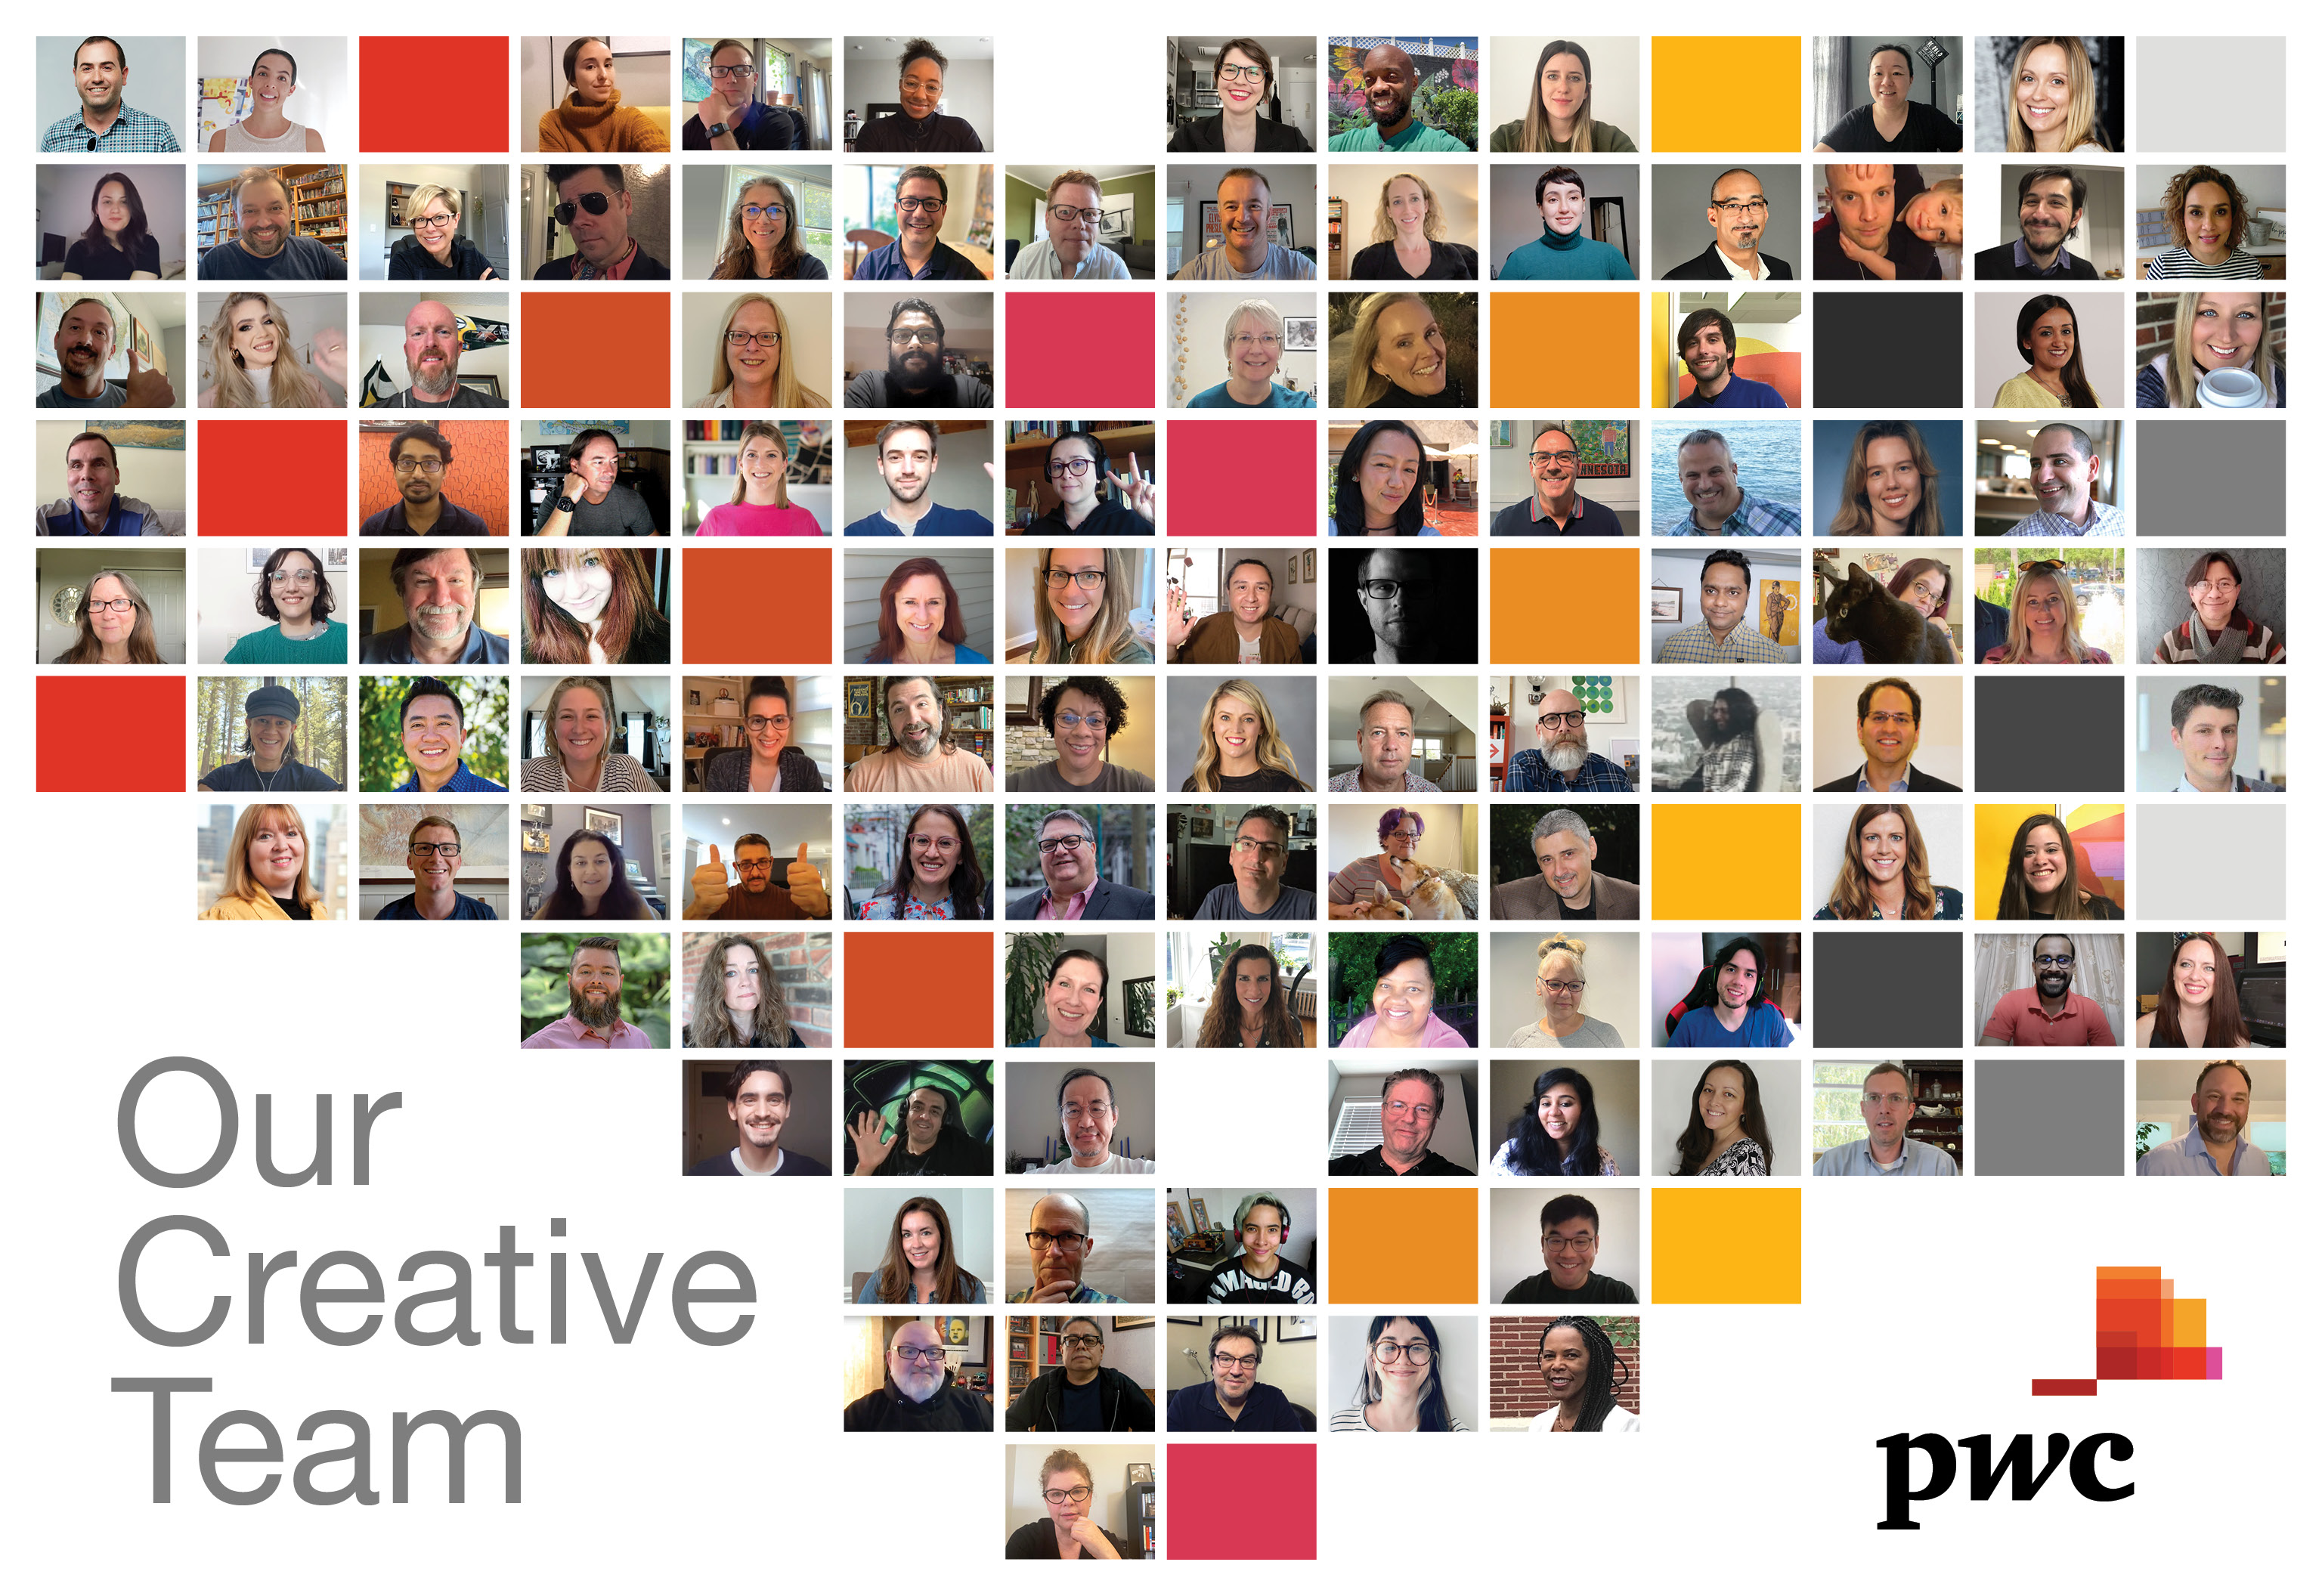 Our Creative Team - Photo of PwC's in-house agency